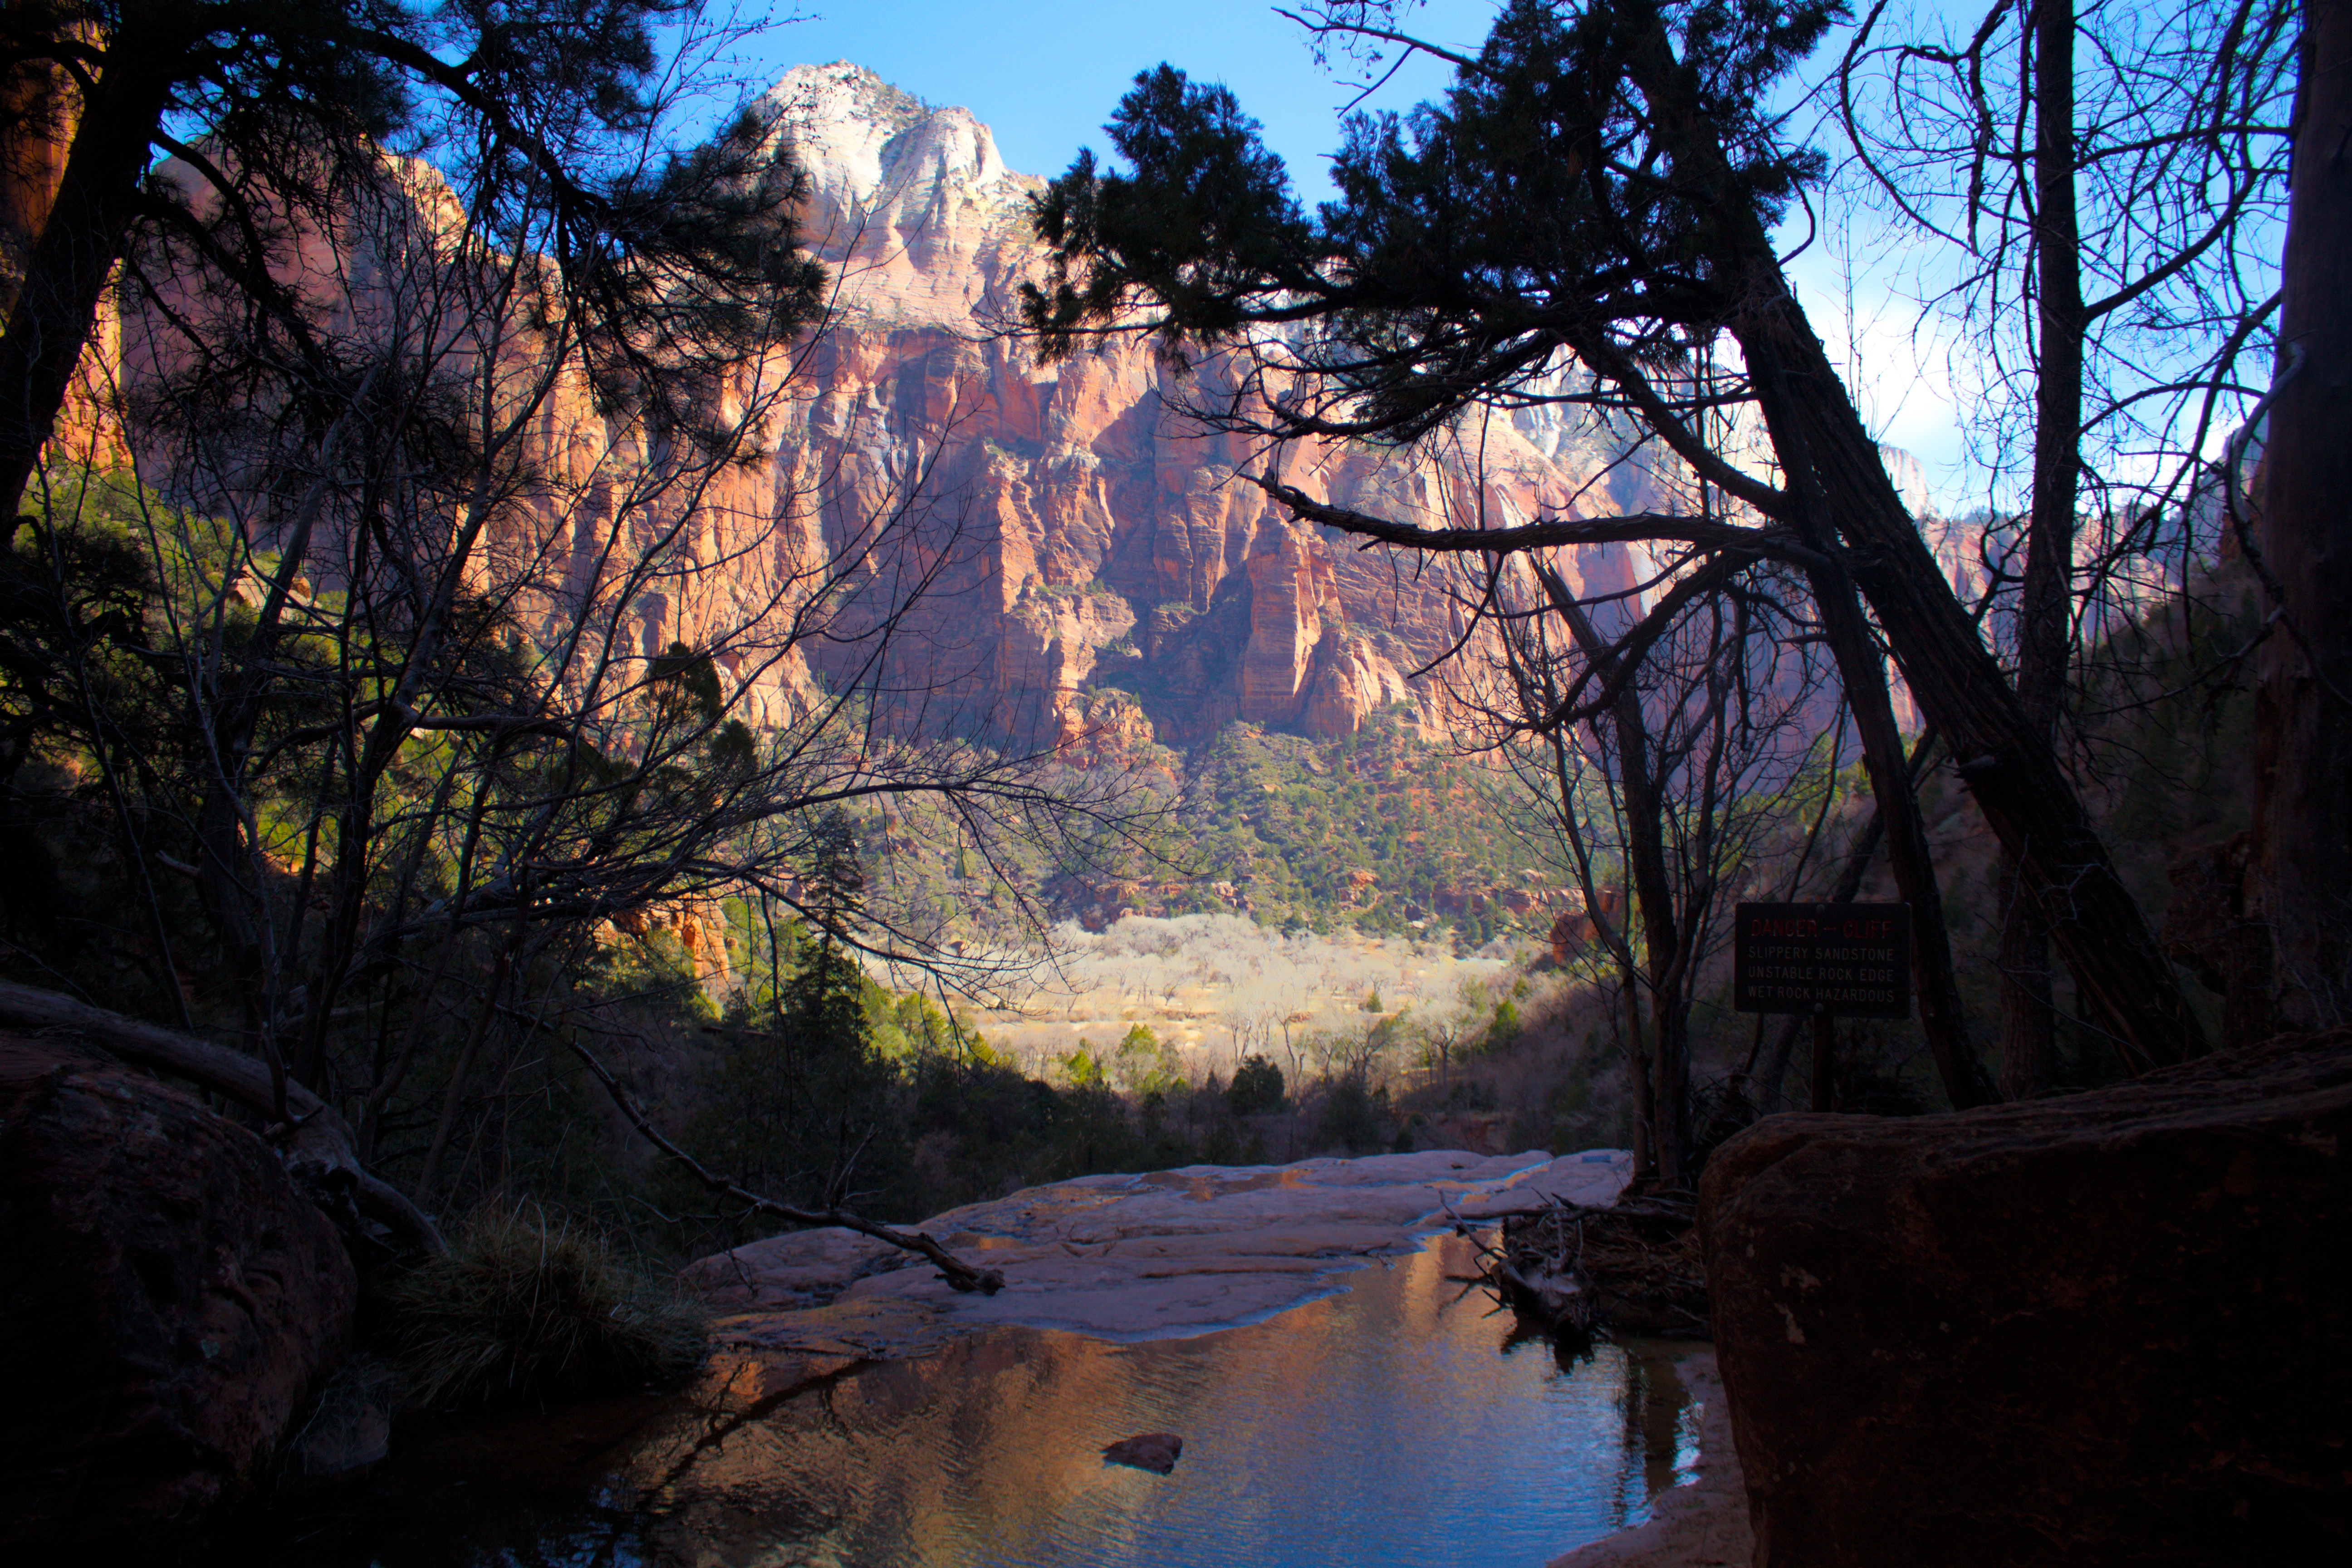 Tours in Zion Canyon